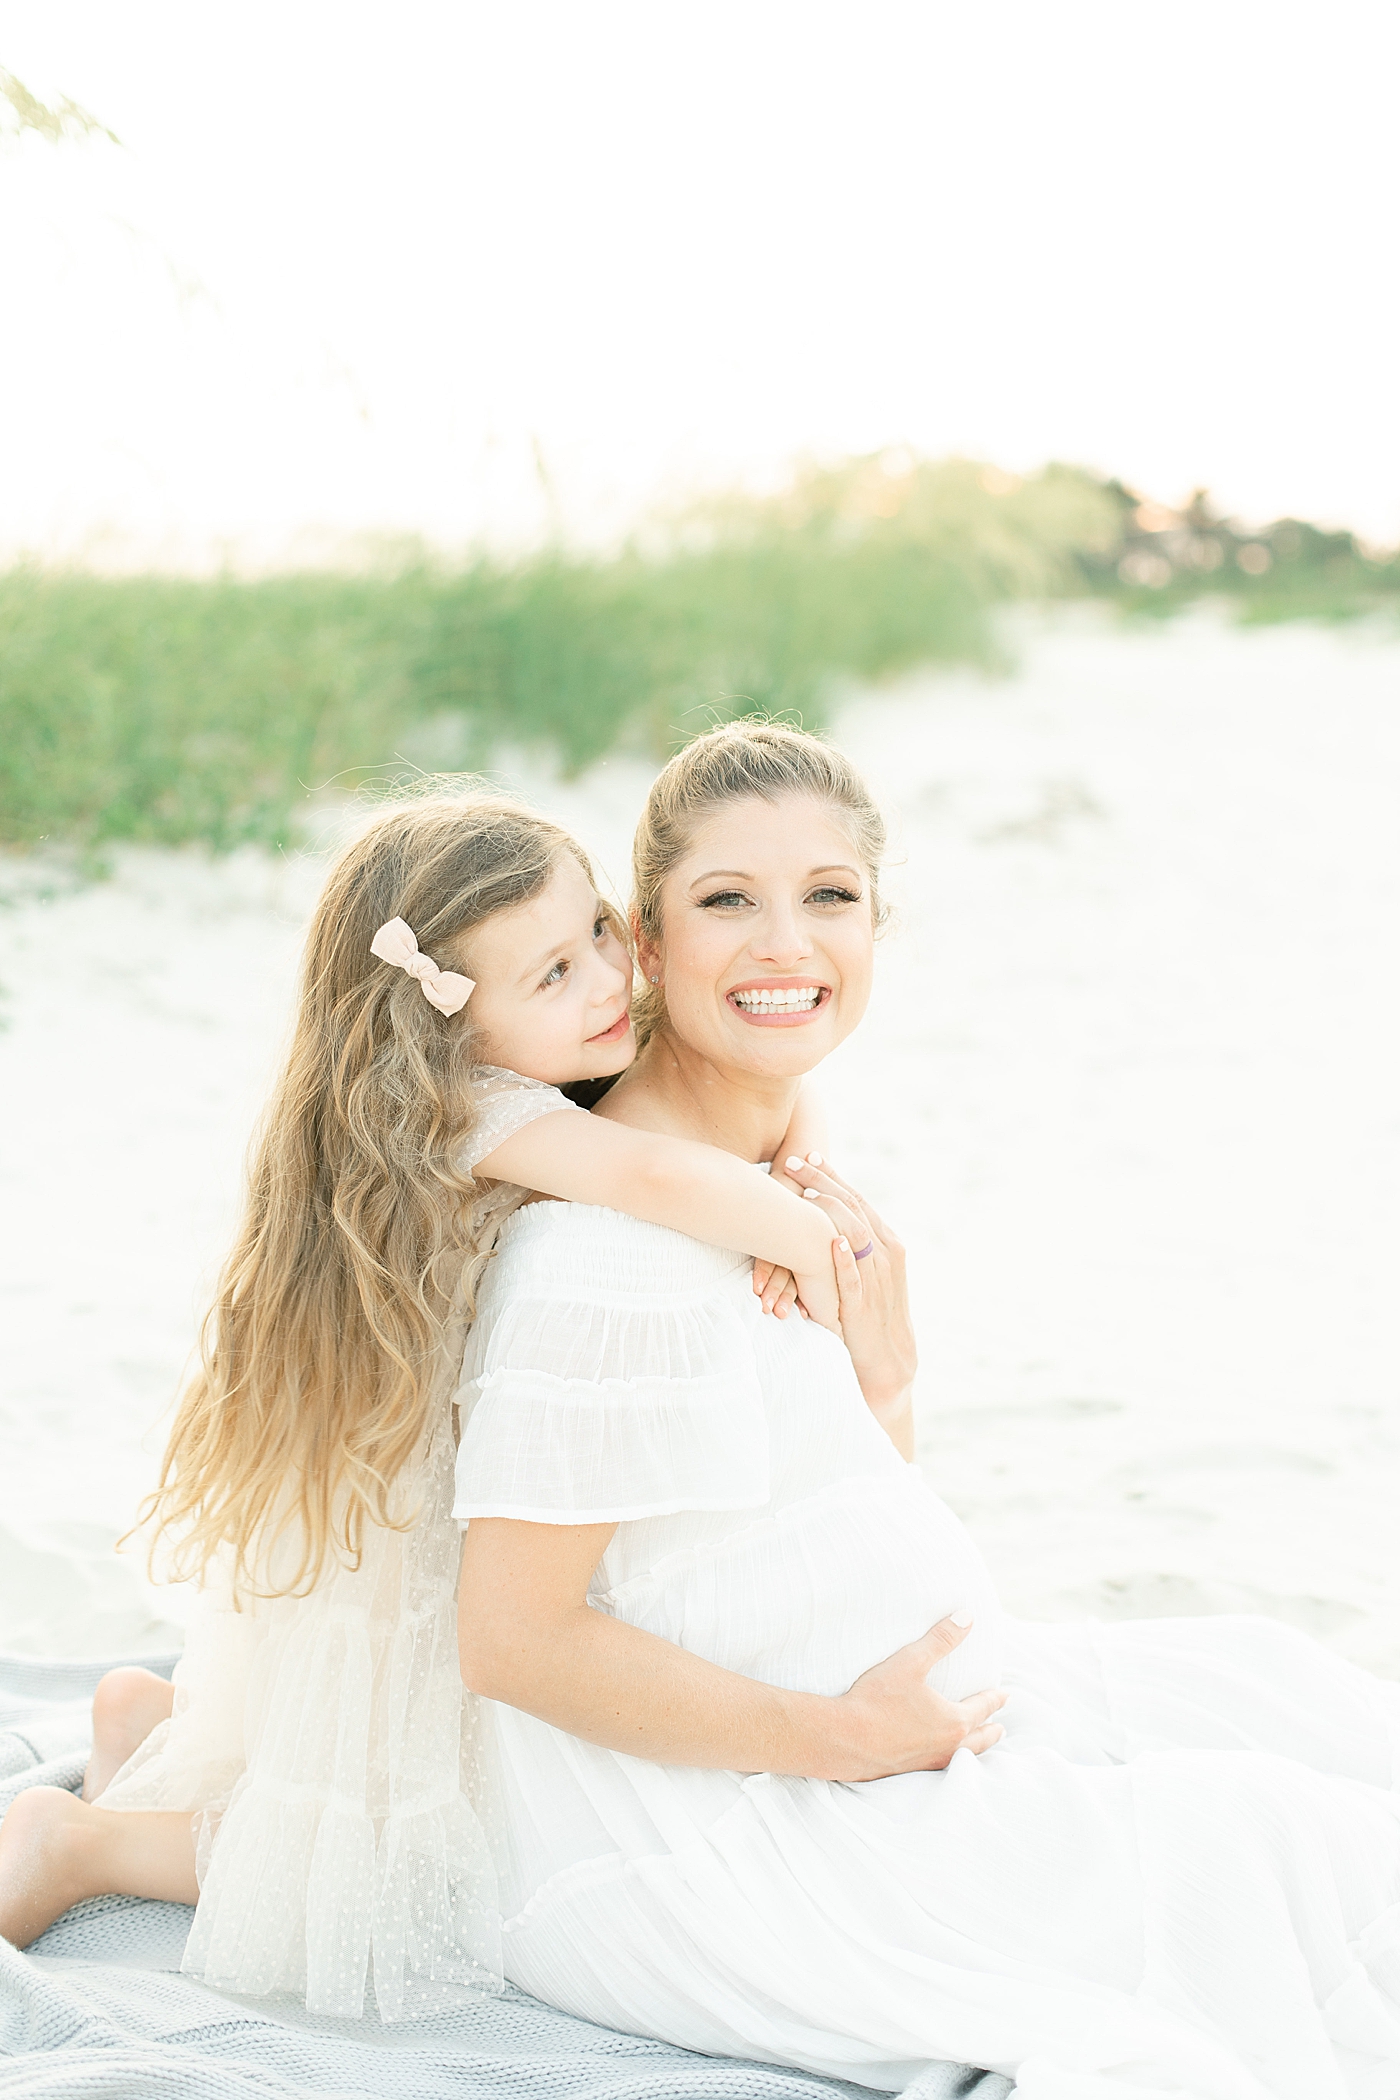 Mom and daughter sitting in the sand at ocean springs. Photo by Little Sunshine Photography.